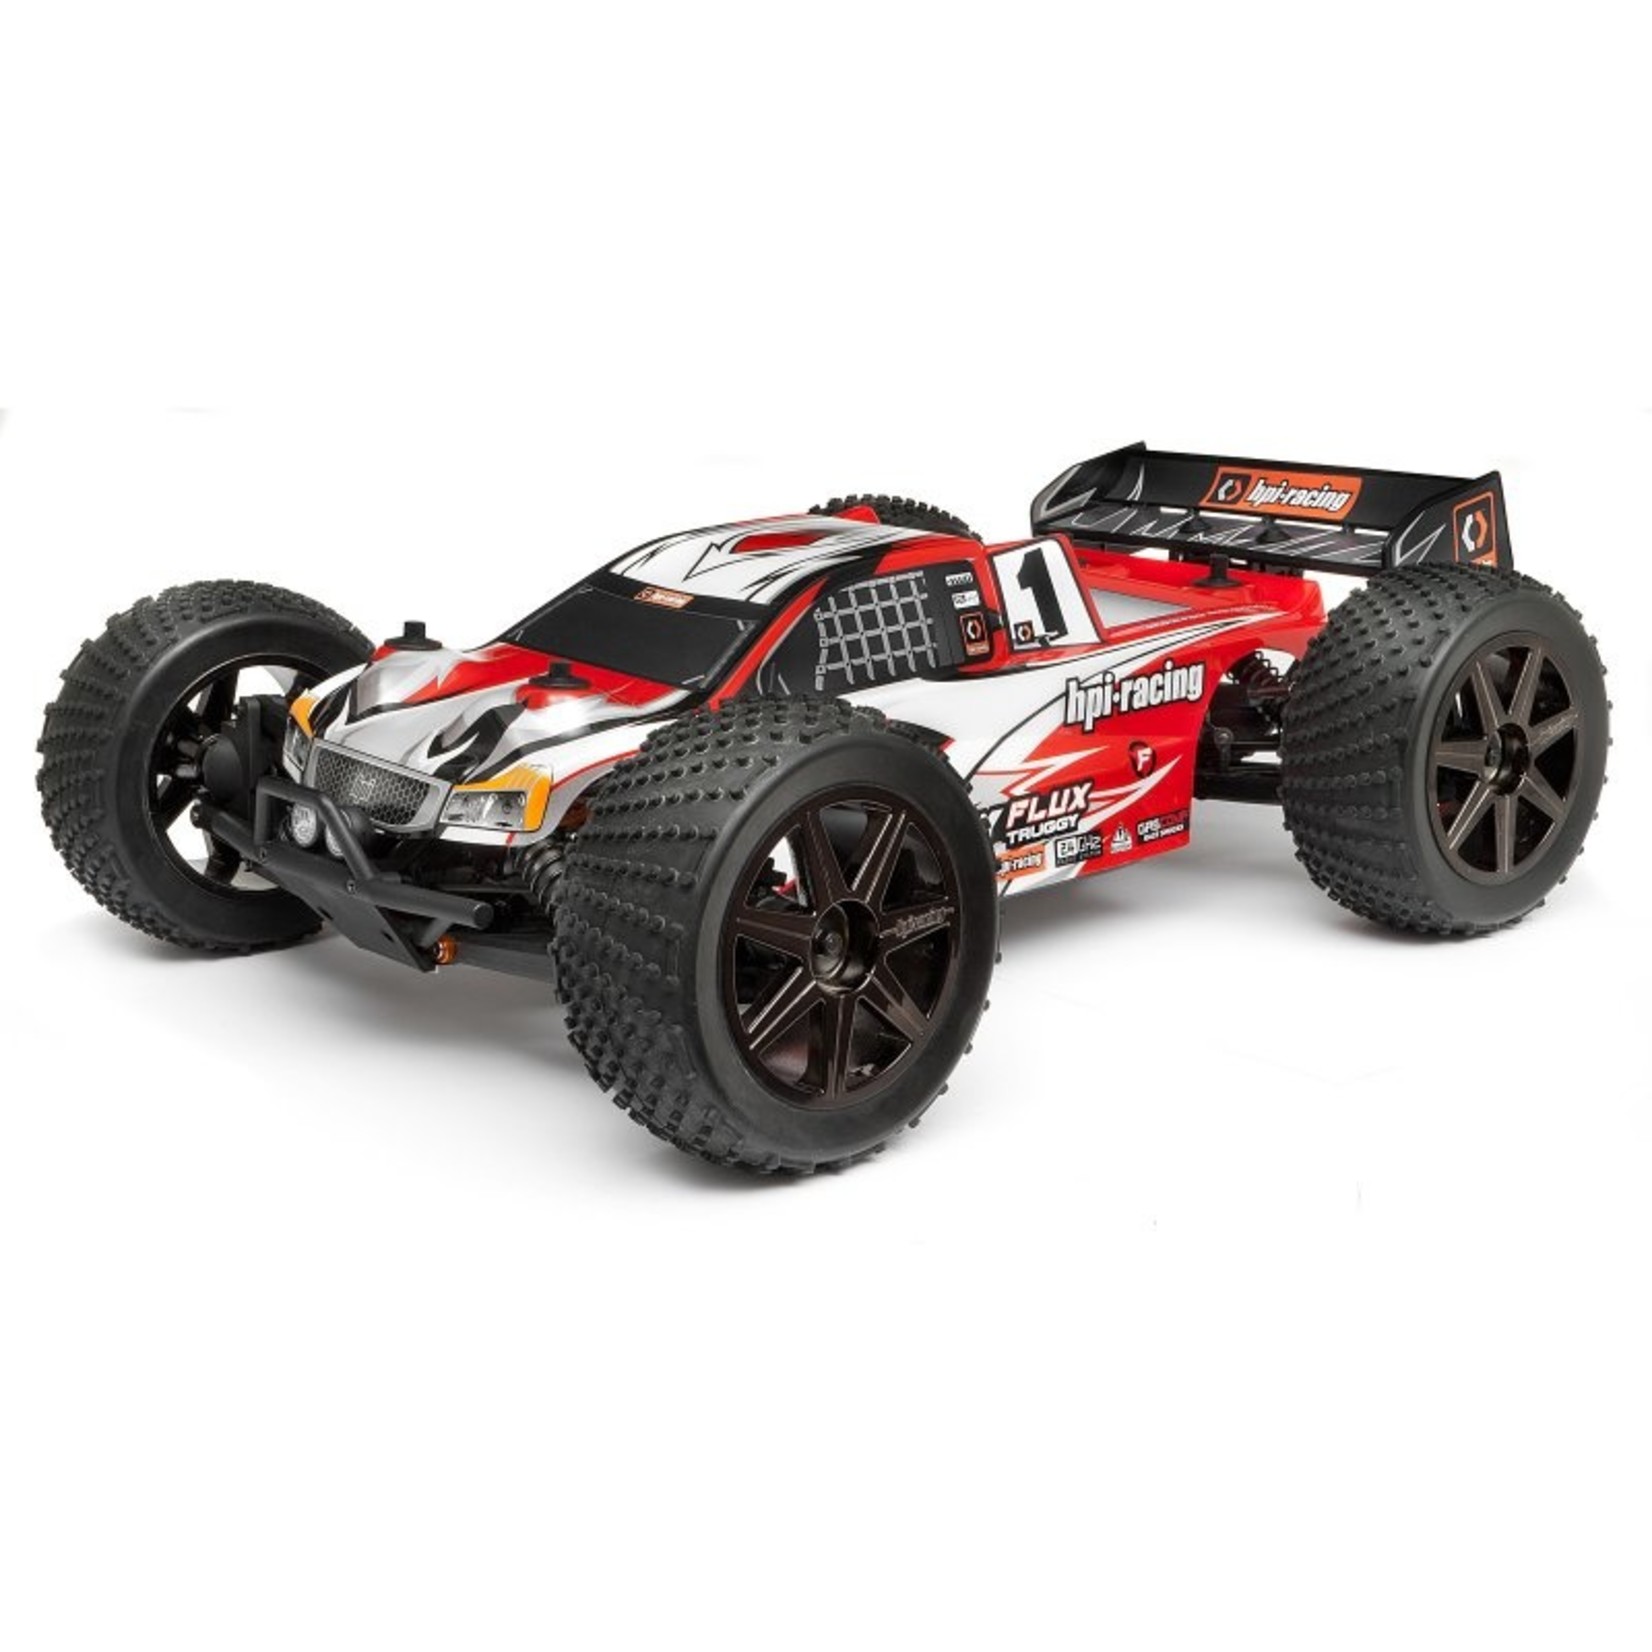 HPI Racing Trimmed And Painted Trophy Truggy Flux 2.4Ghz RTR Body